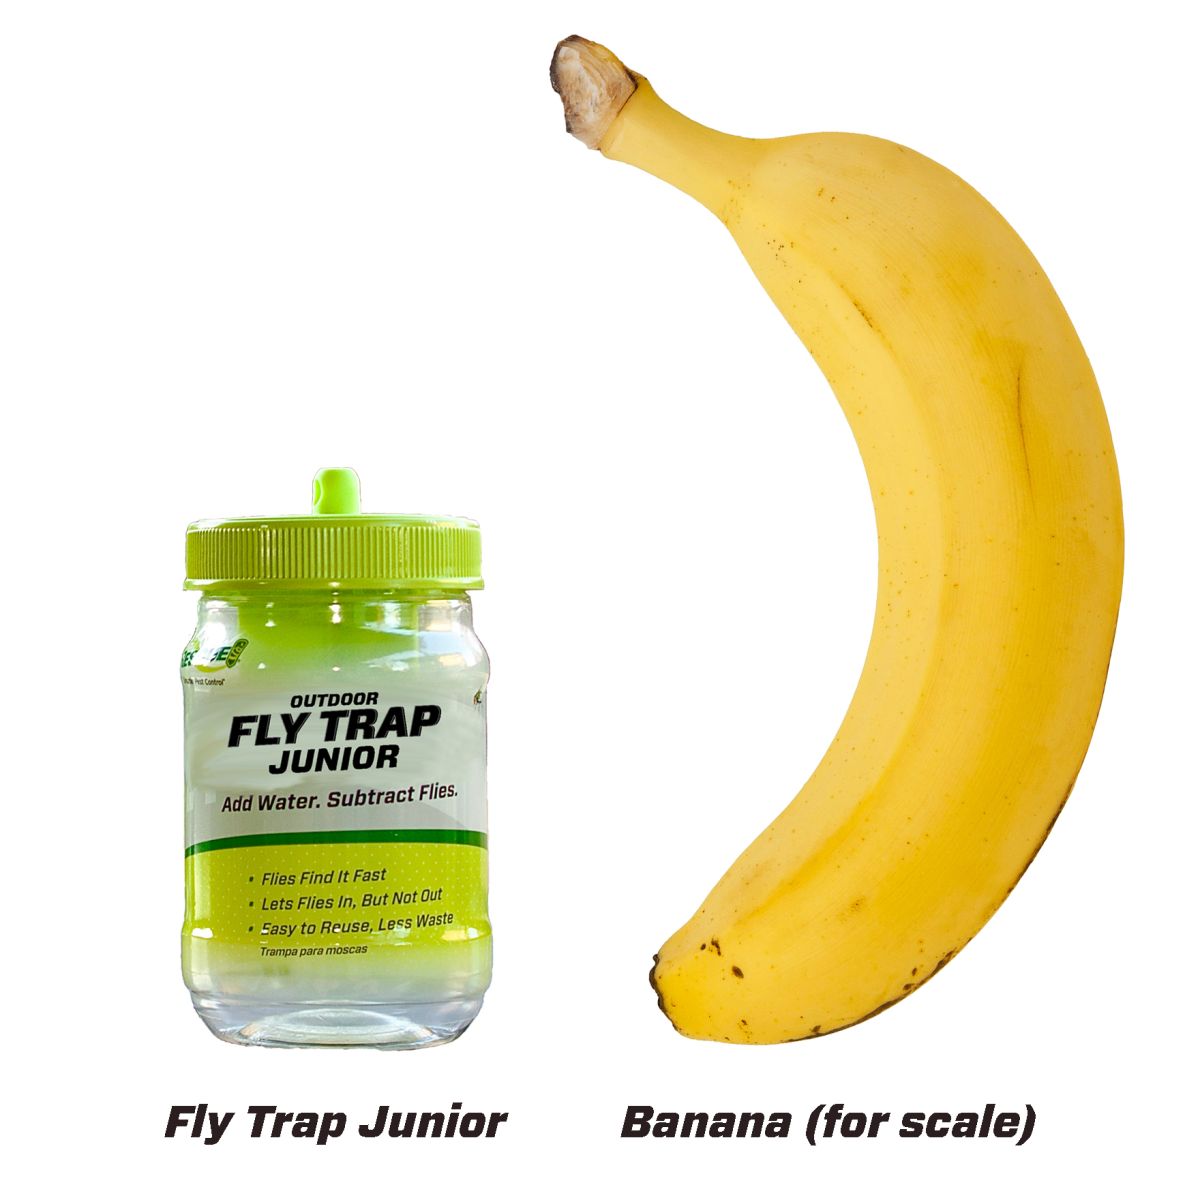 Fly Trap Junior Compared to a Banana For Scale